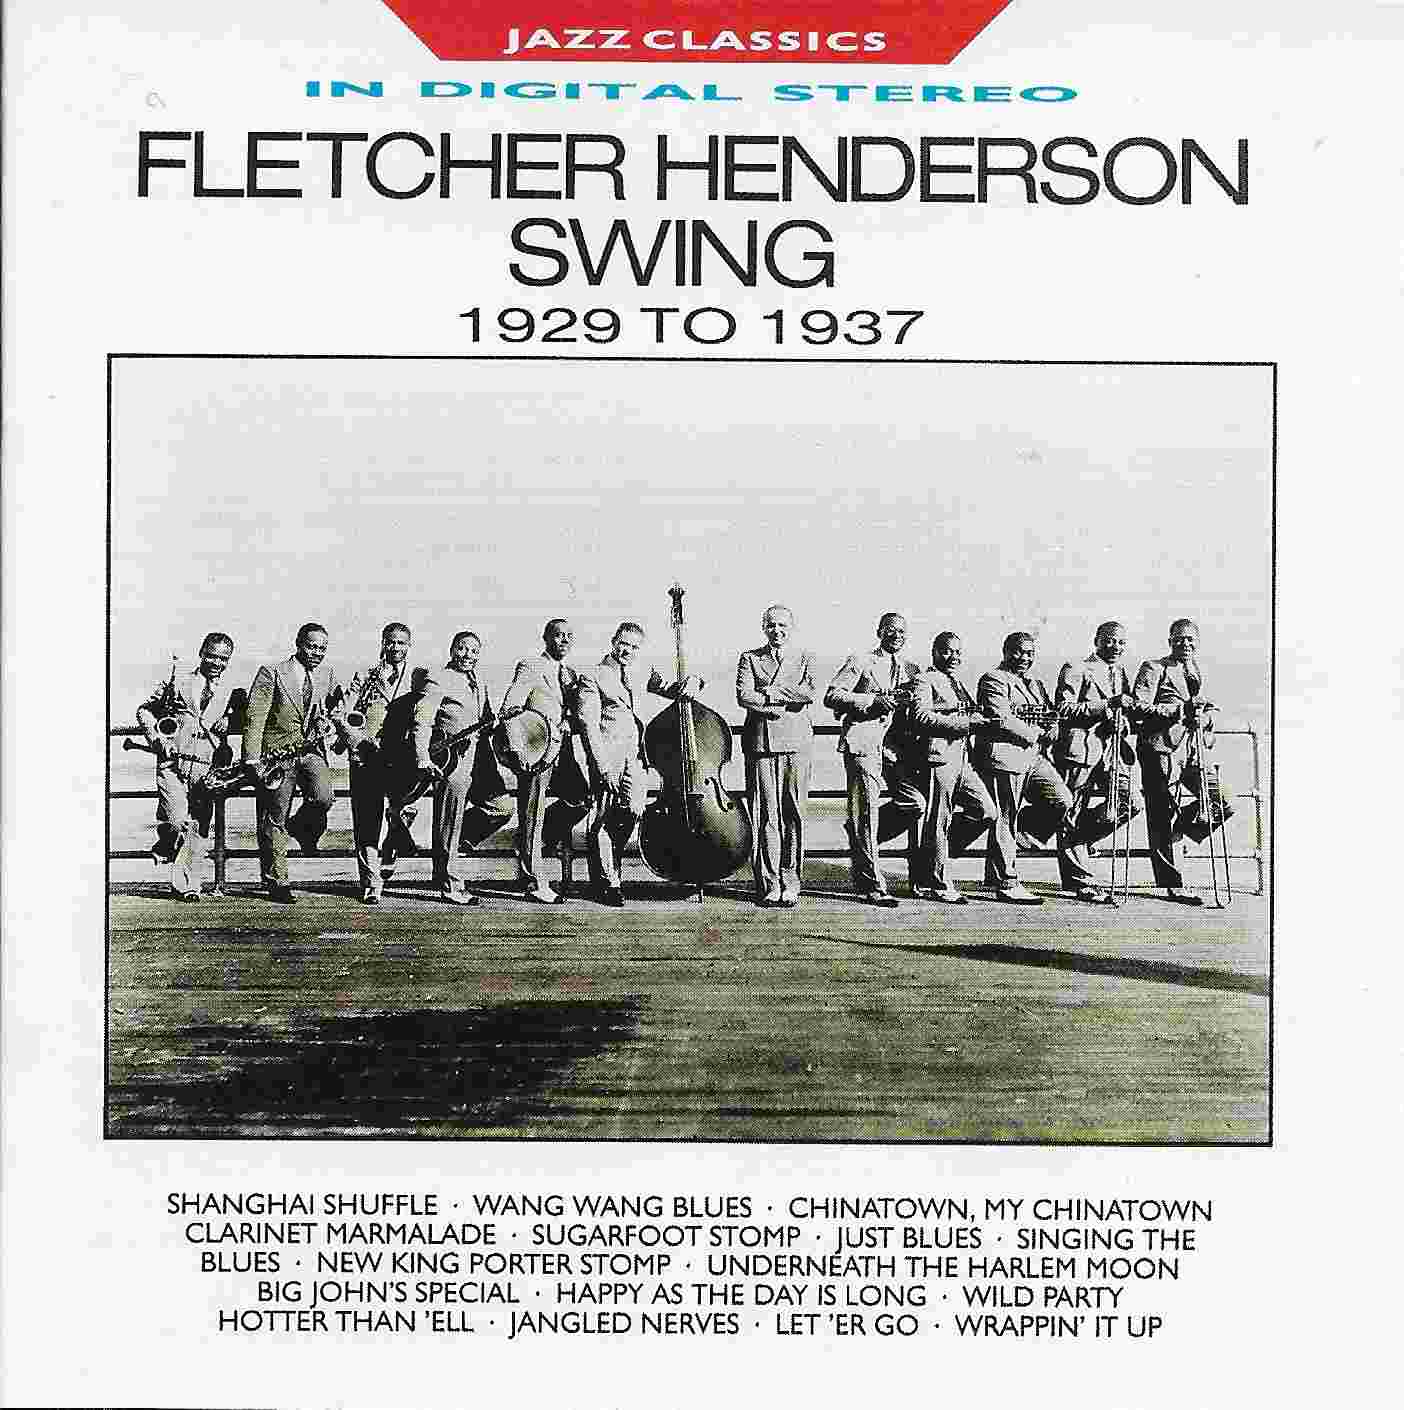 Picture of Jazz classics - Fletcher Henderson Swing 1929 - 1937 by artist Fletcher Henderson  from the BBC cds - Records and Tapes library